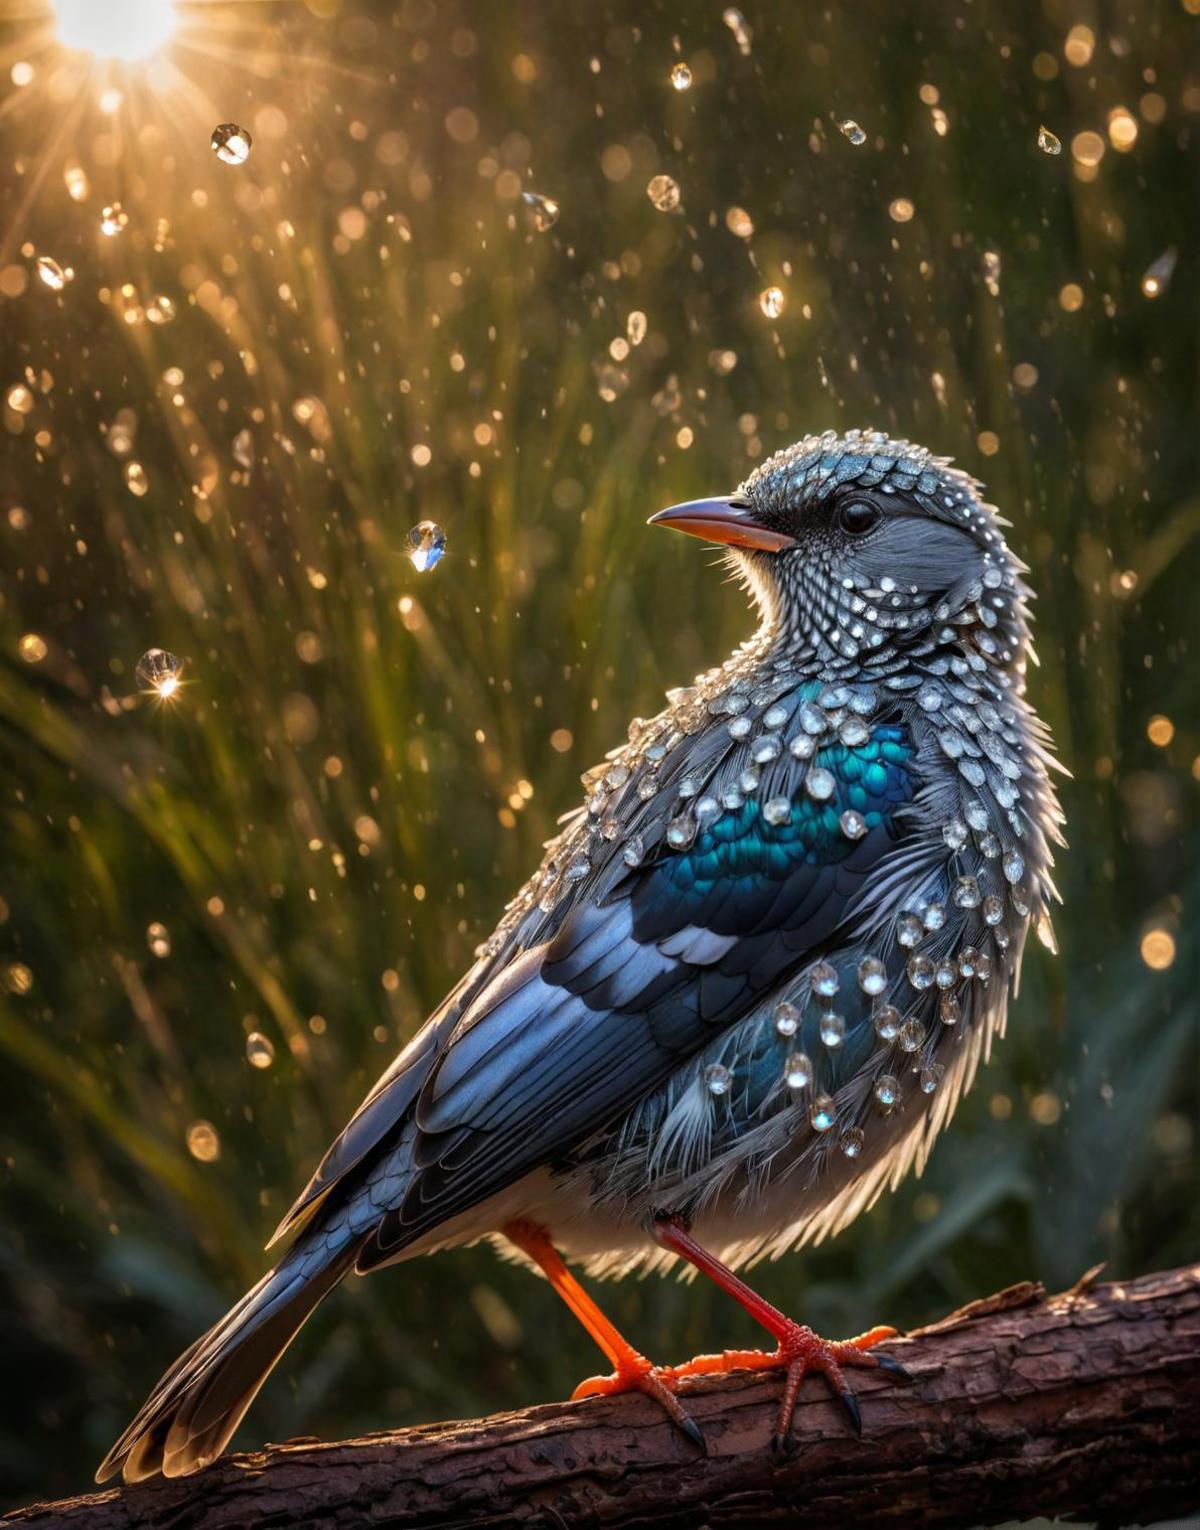 A blue and white bird with iridescent feathers standing in the rain.